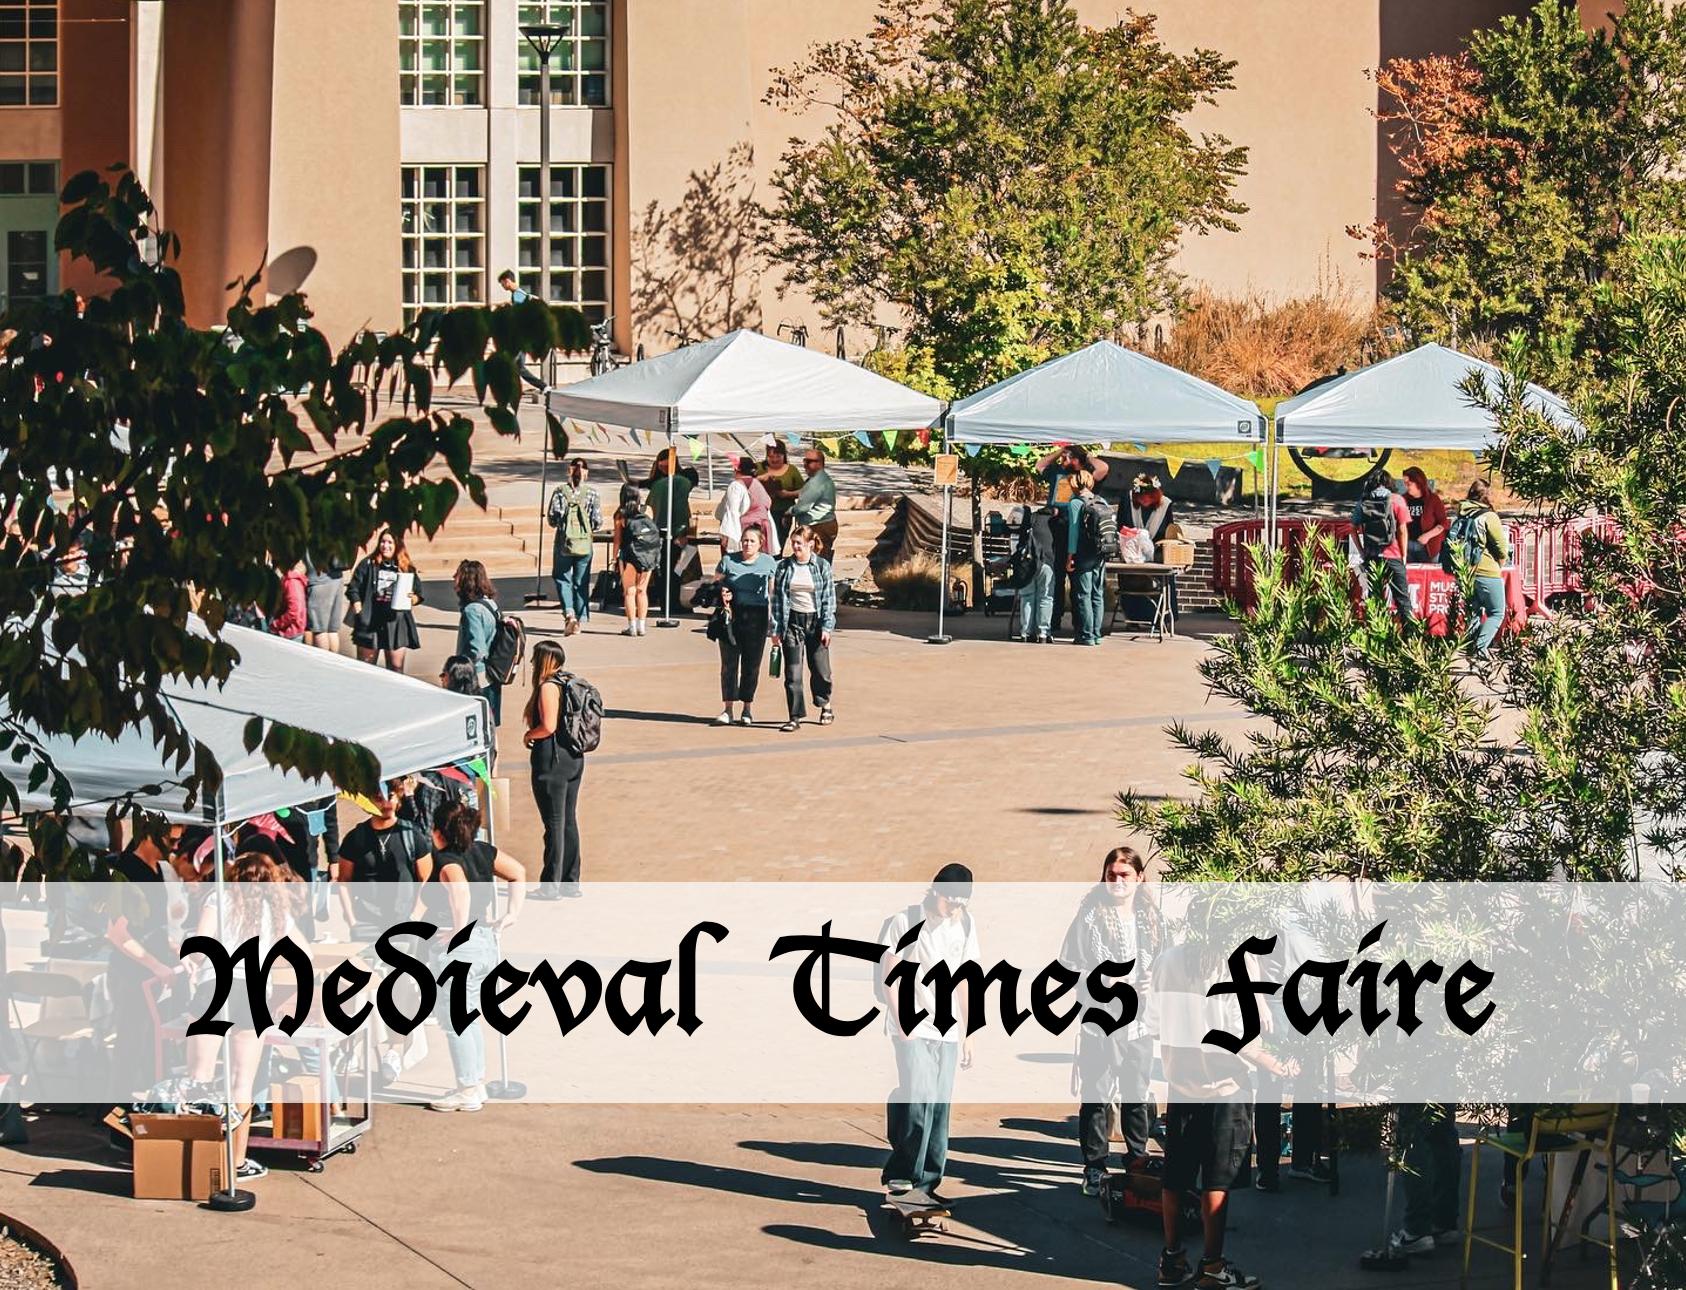 Medieval Times Faire Graphic